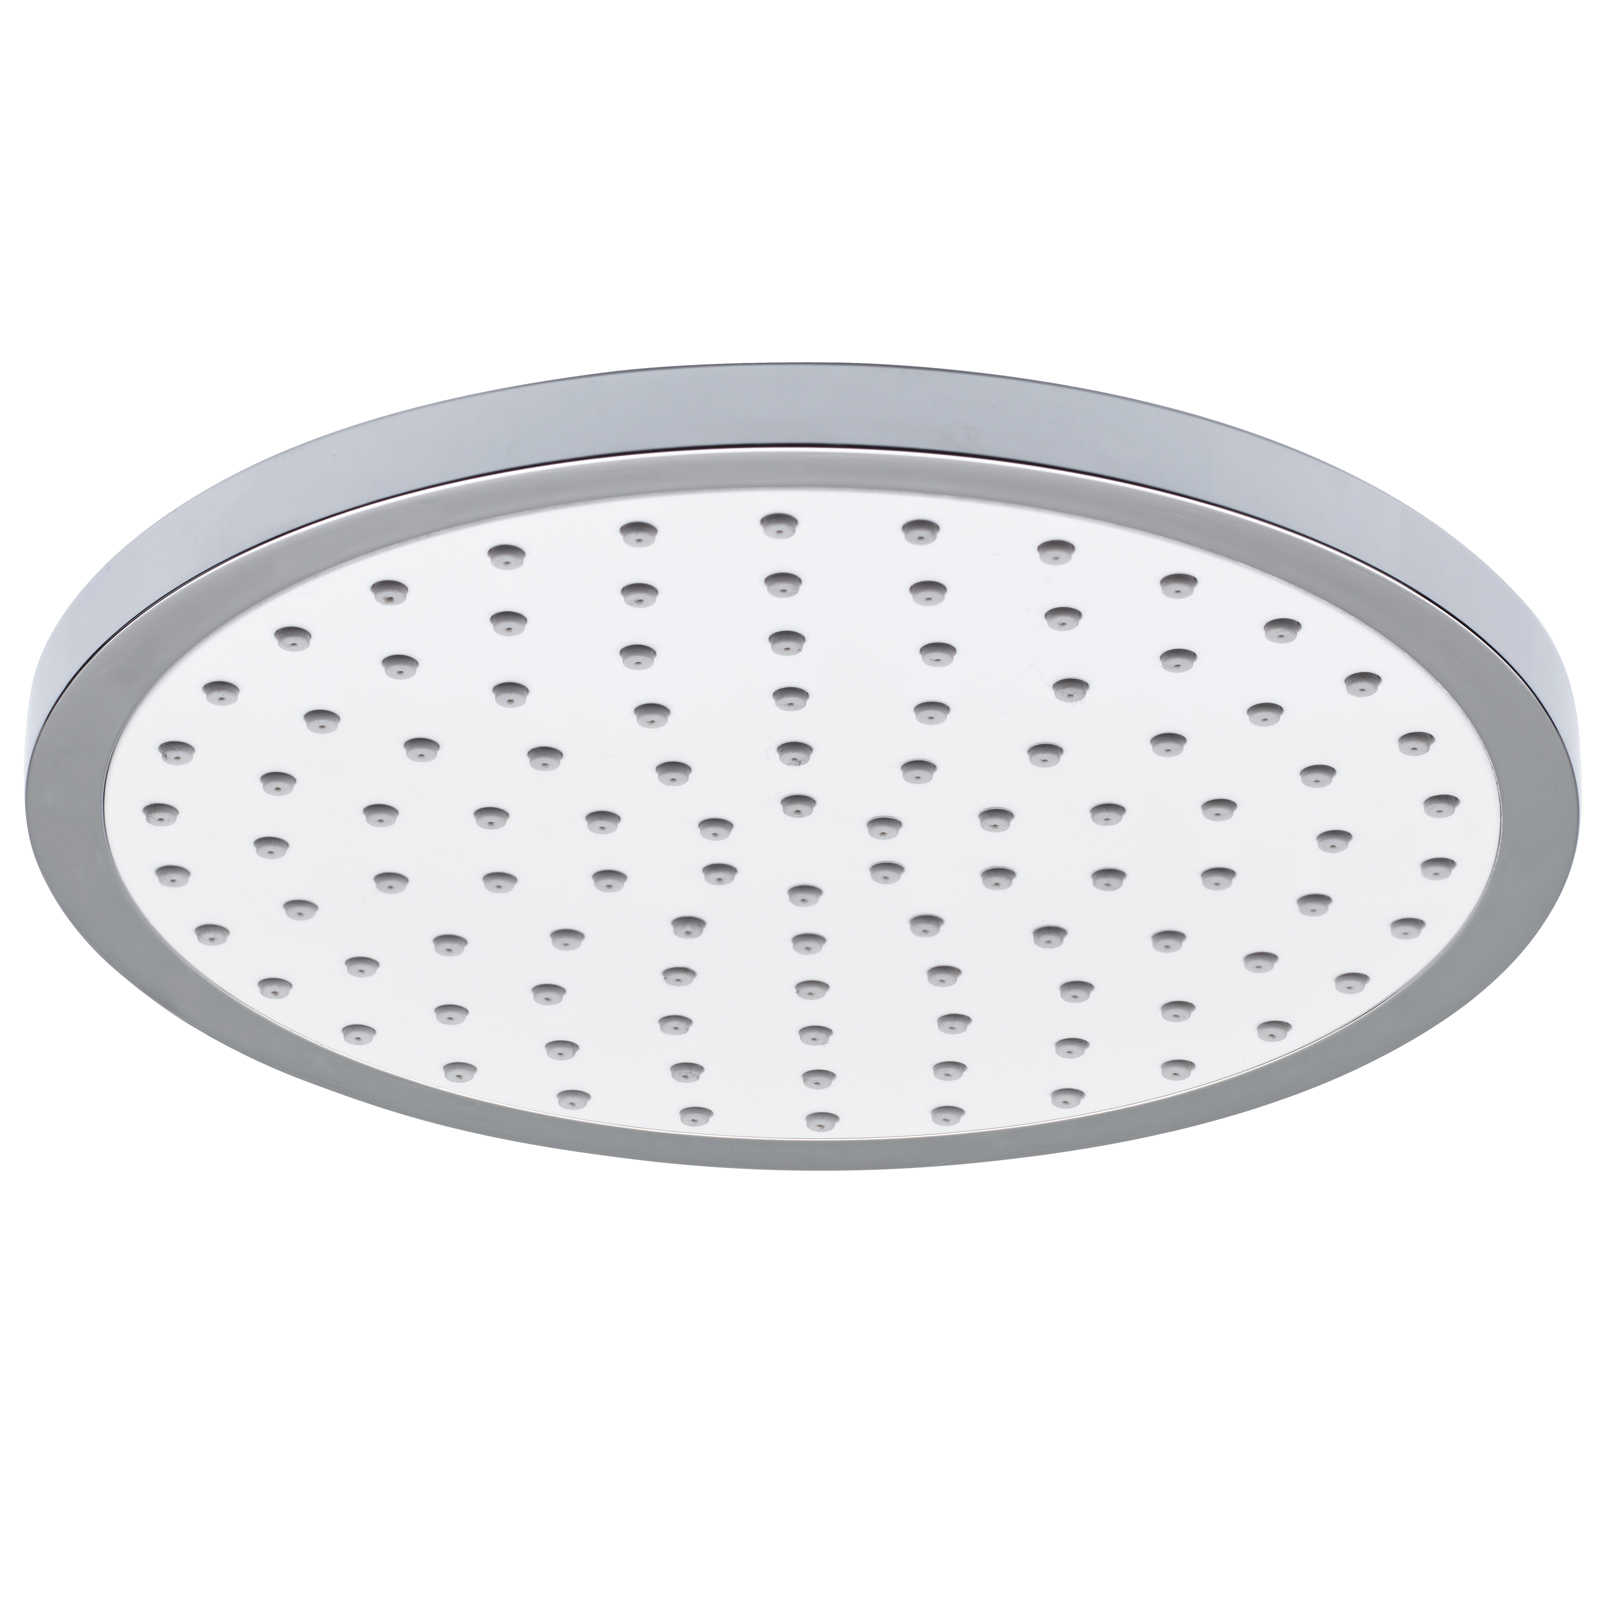 ABS shower head Ø 20 cm with anti-lime picots